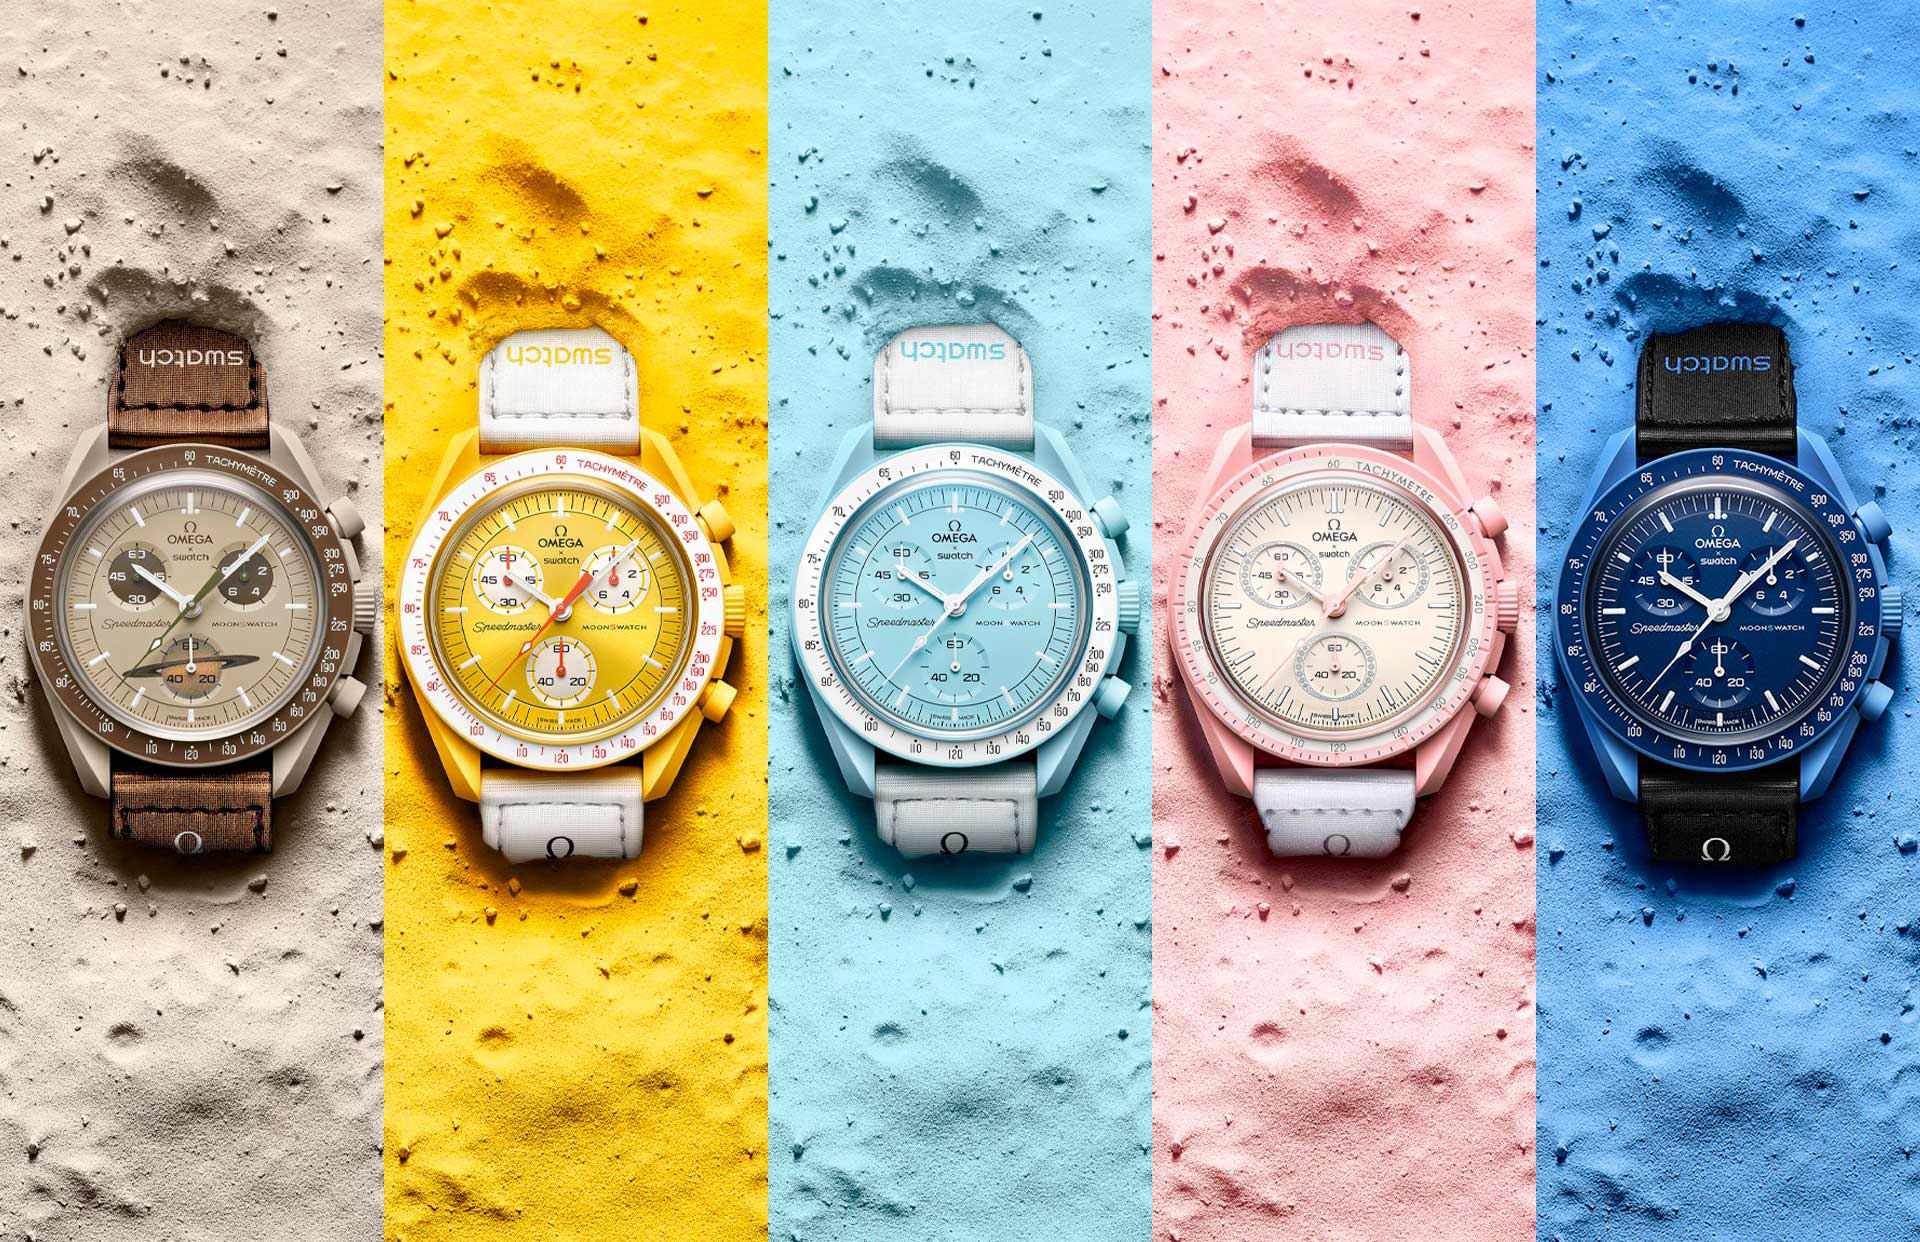 🔴 Omega and Swatch, a model for exploring market innovation